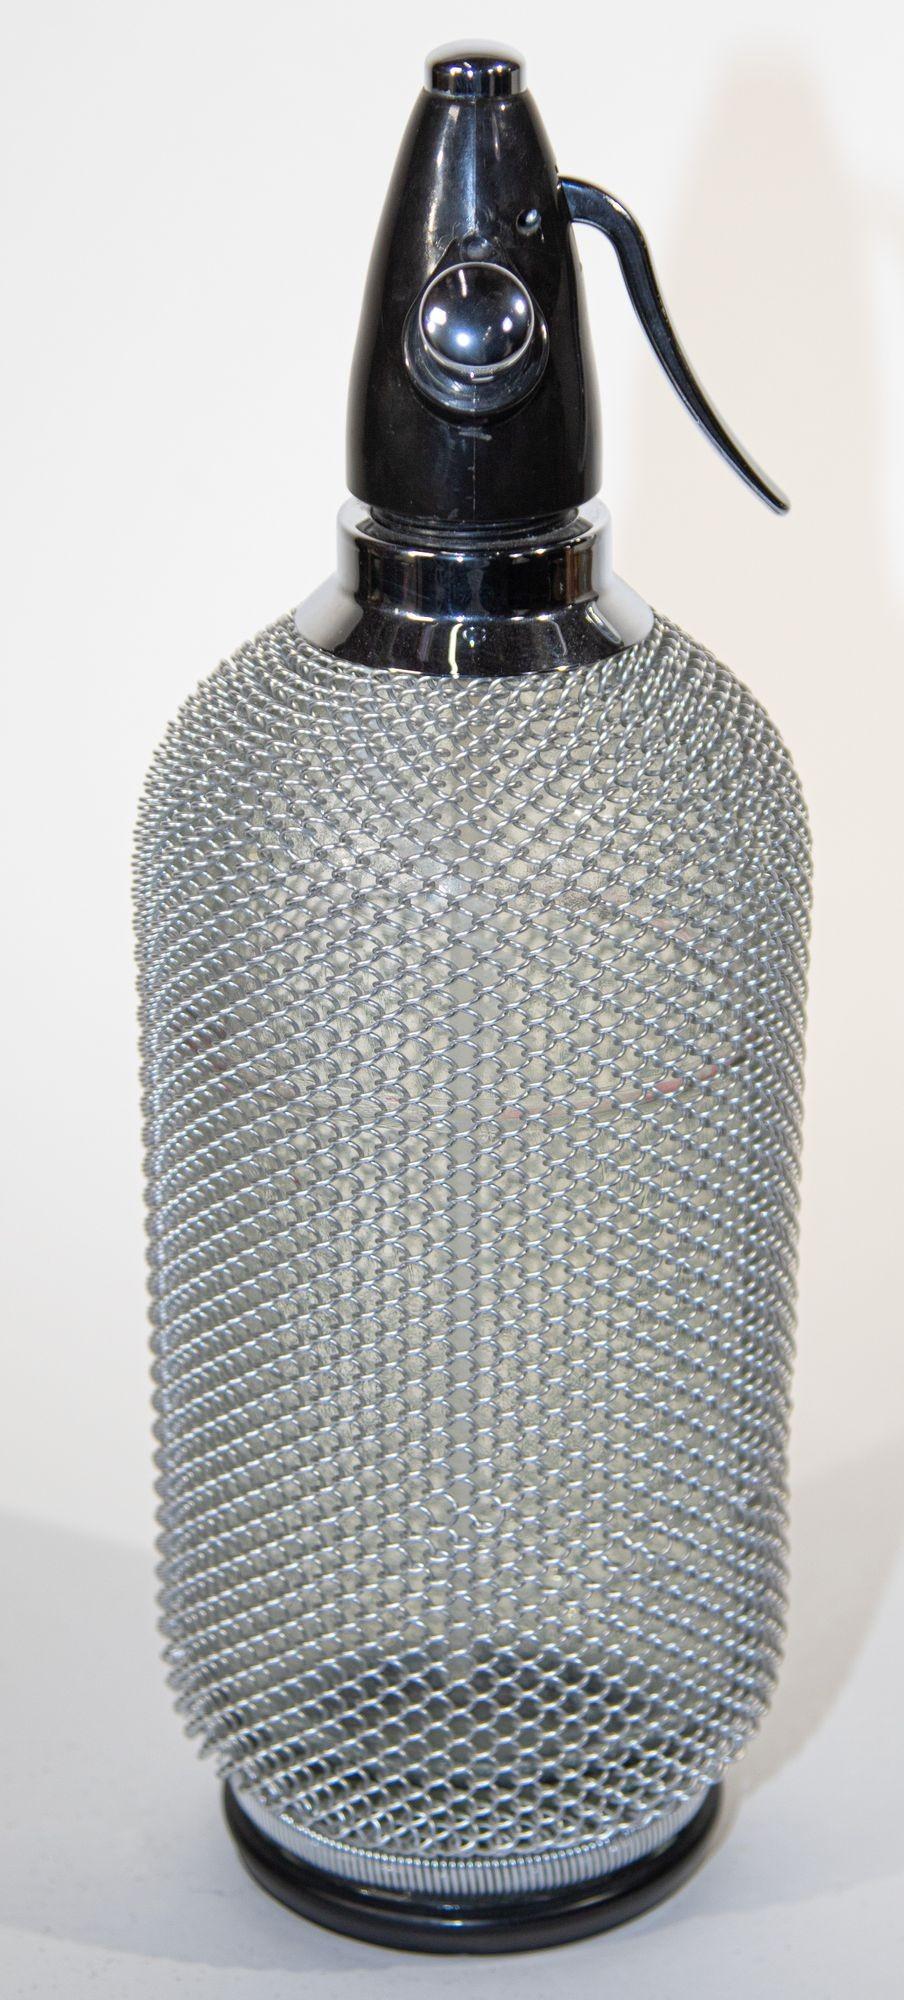 Vintage Classic Soda Siphon Seltzer Glass Bottle with Wire Mesh In Good Condition For Sale In North Hollywood, CA